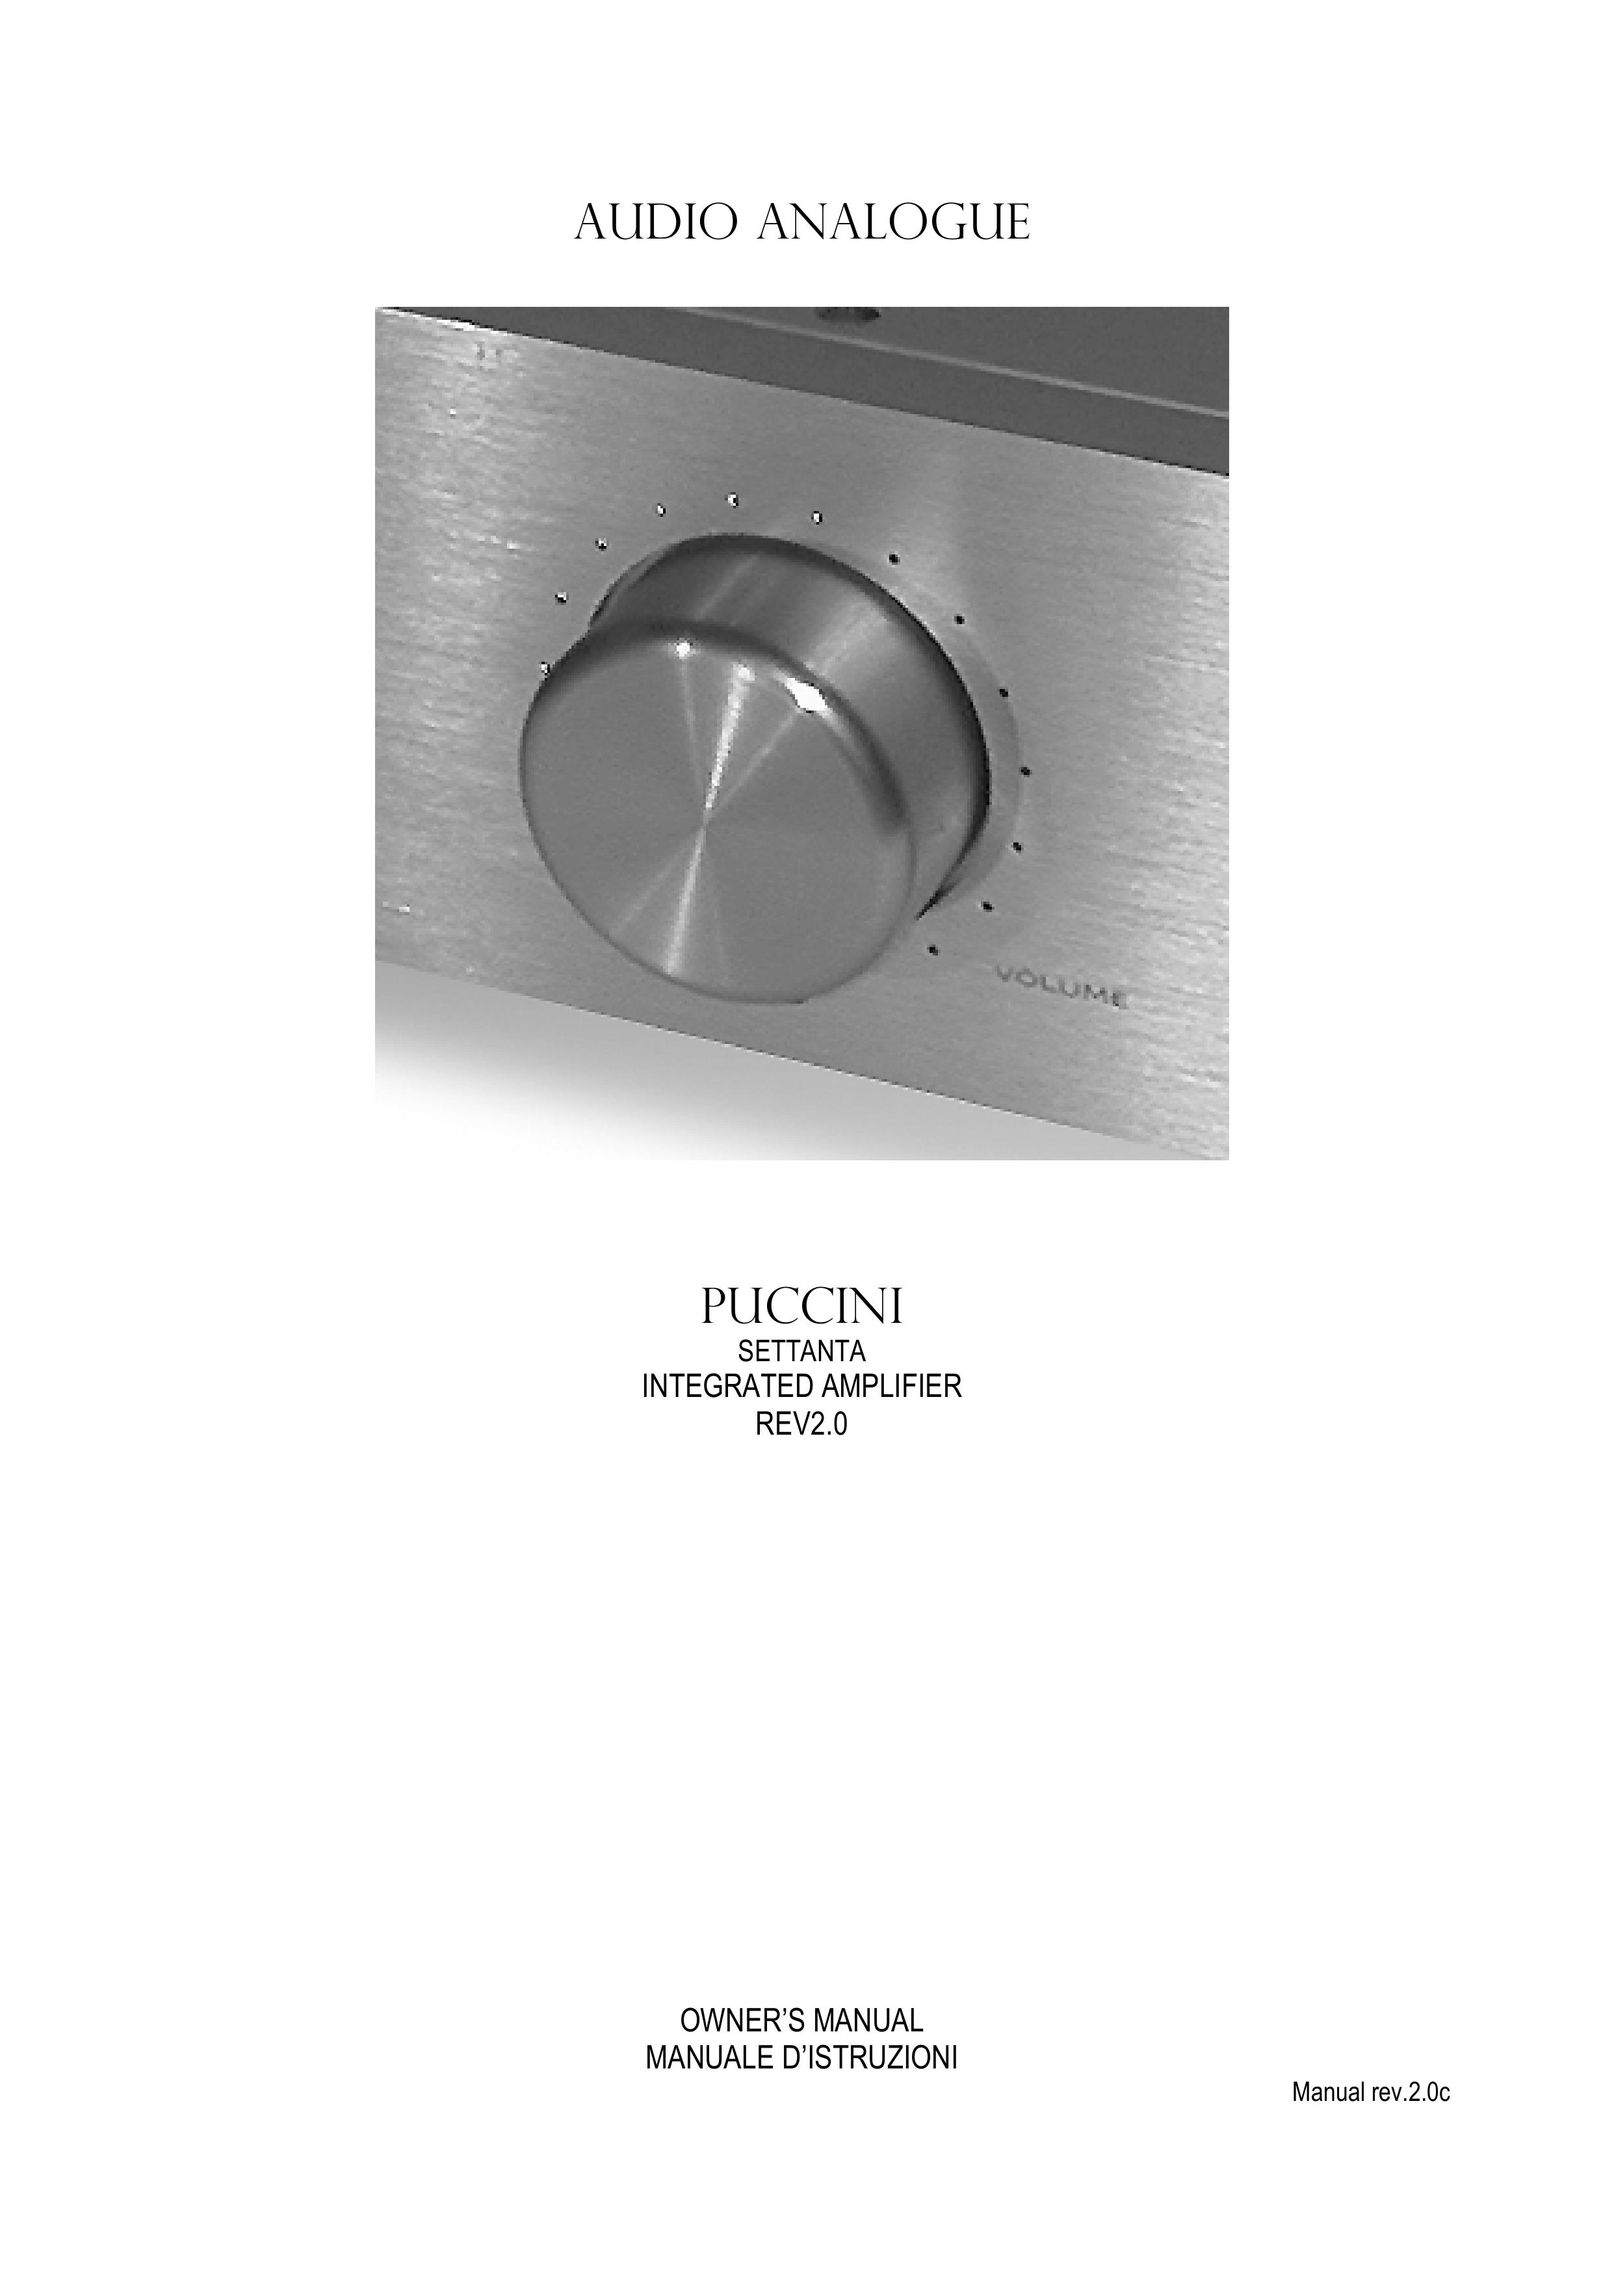 Audio Analogue SRL Puccini Settanta Stereo Amplifier User Manual